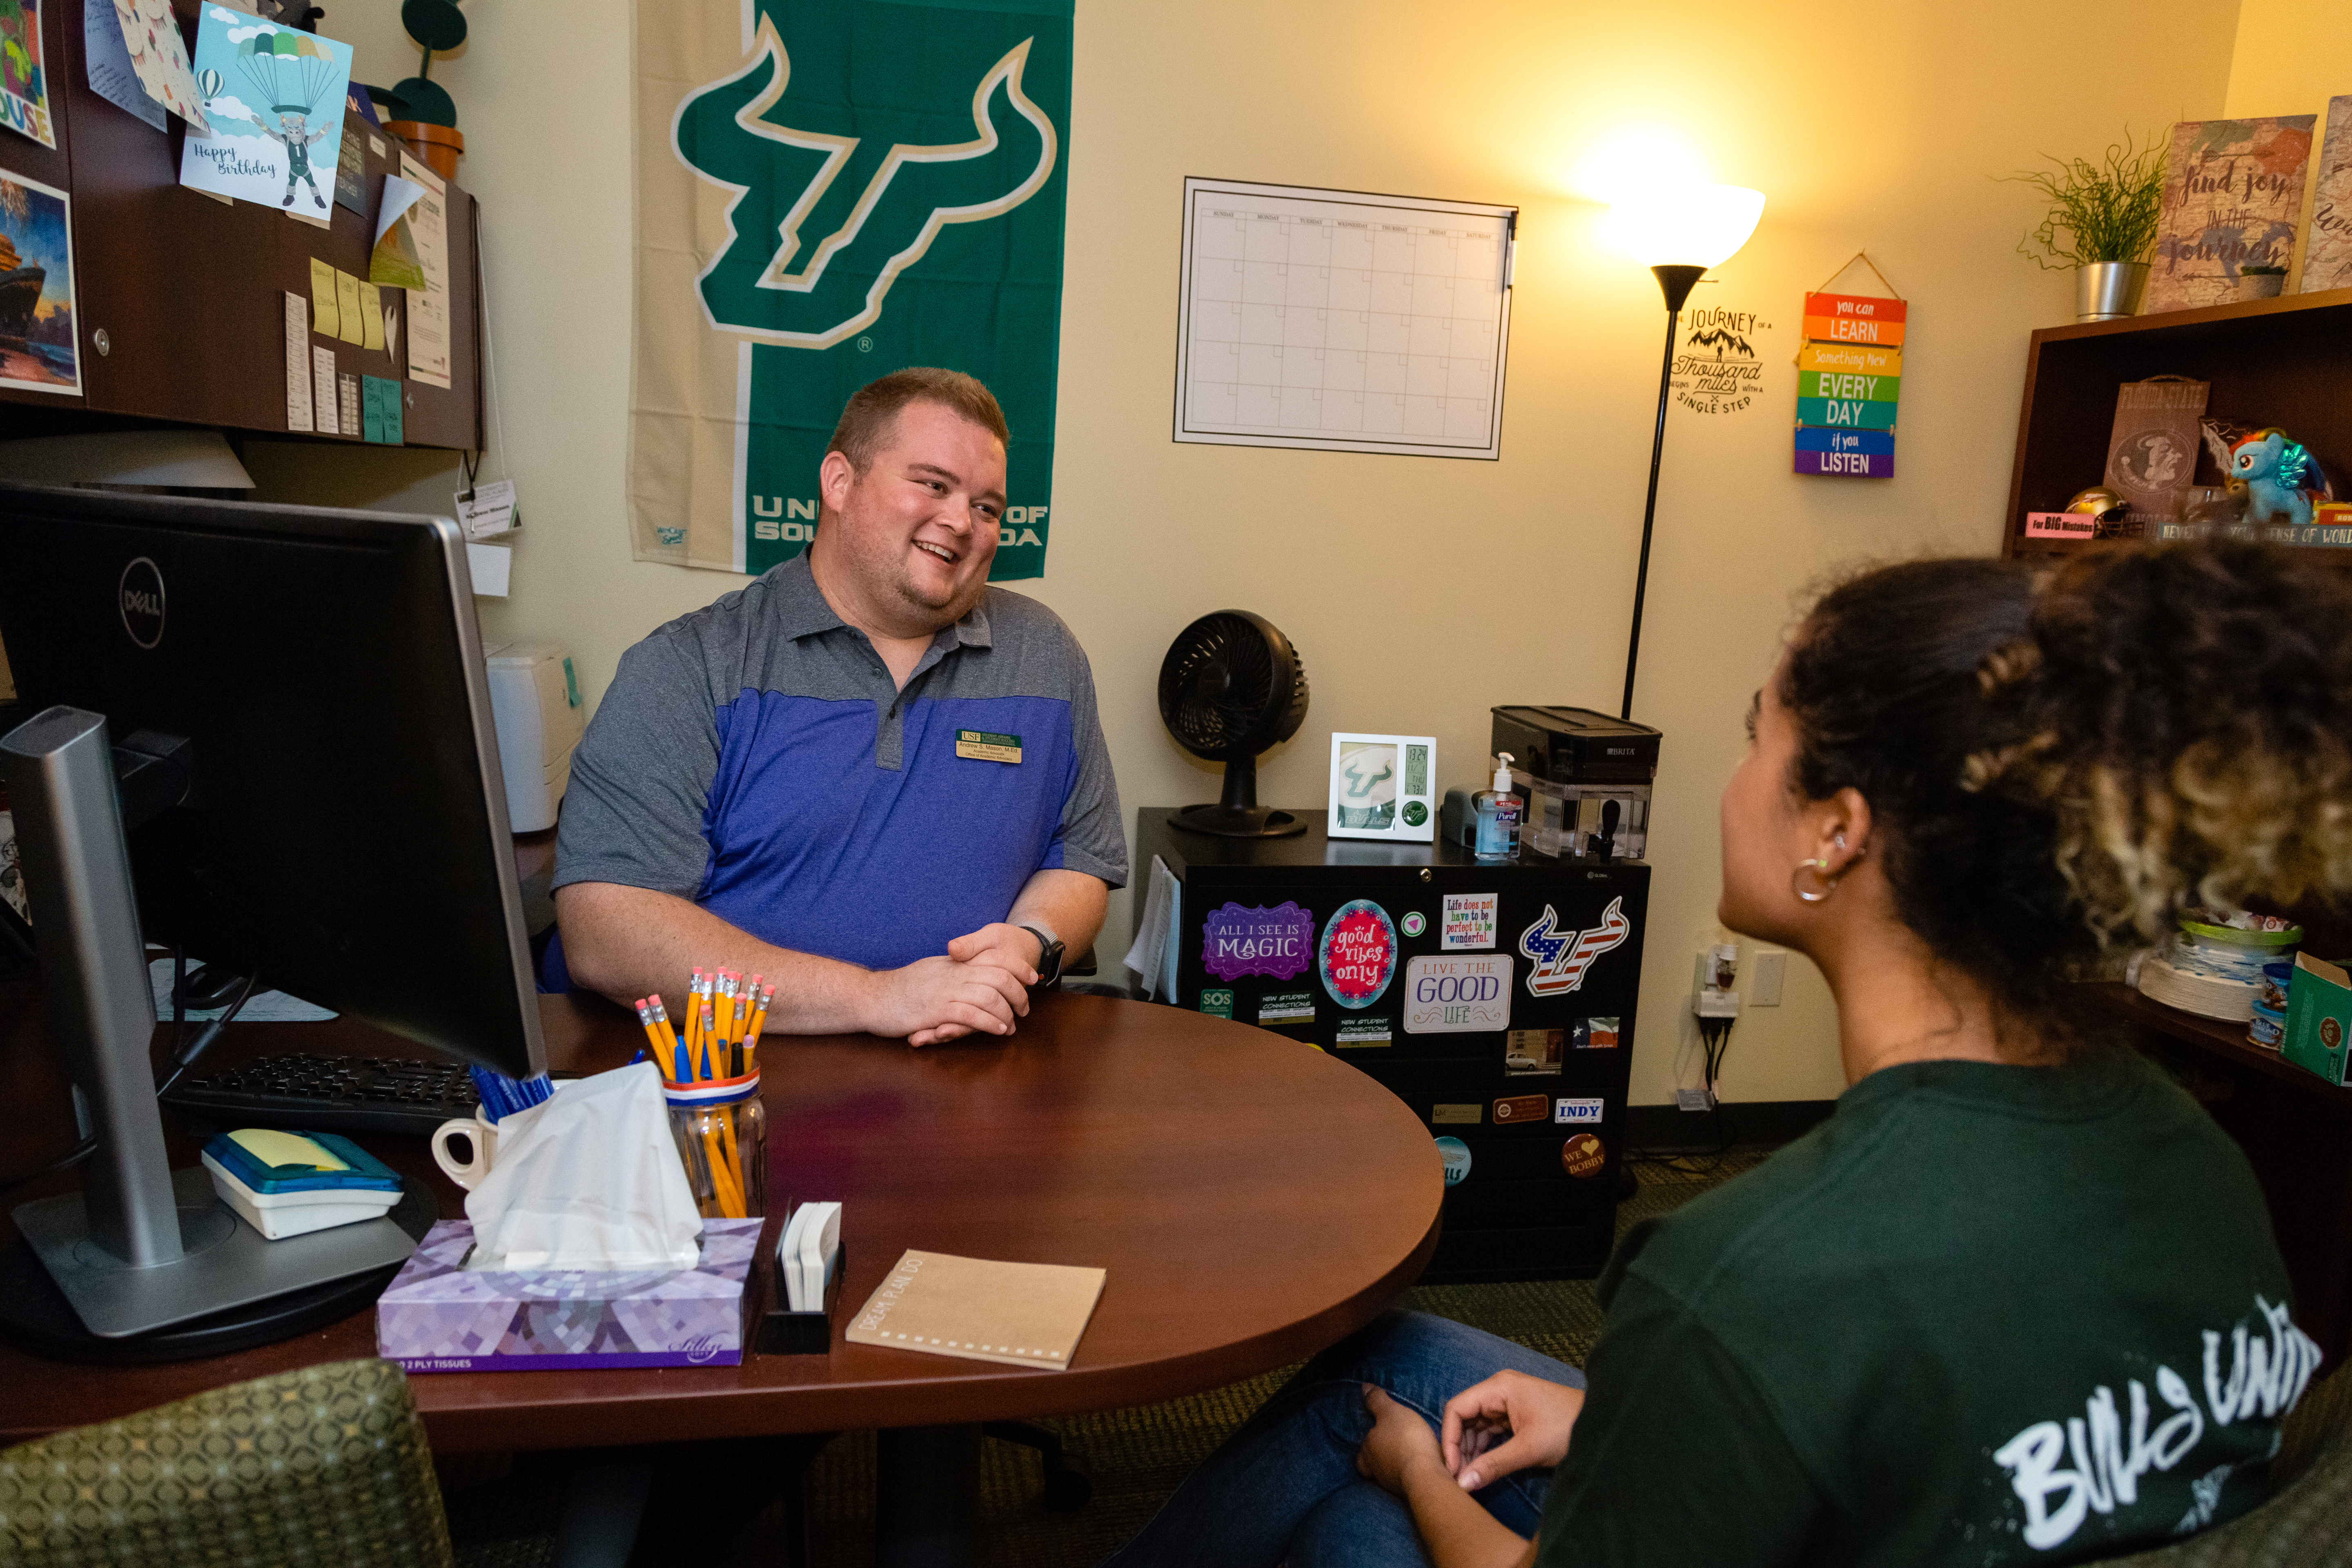 The University of South Florida’s staff of academic advocates serve as “care managers” who can connect students to all of the university’s sometimes scattered support services.